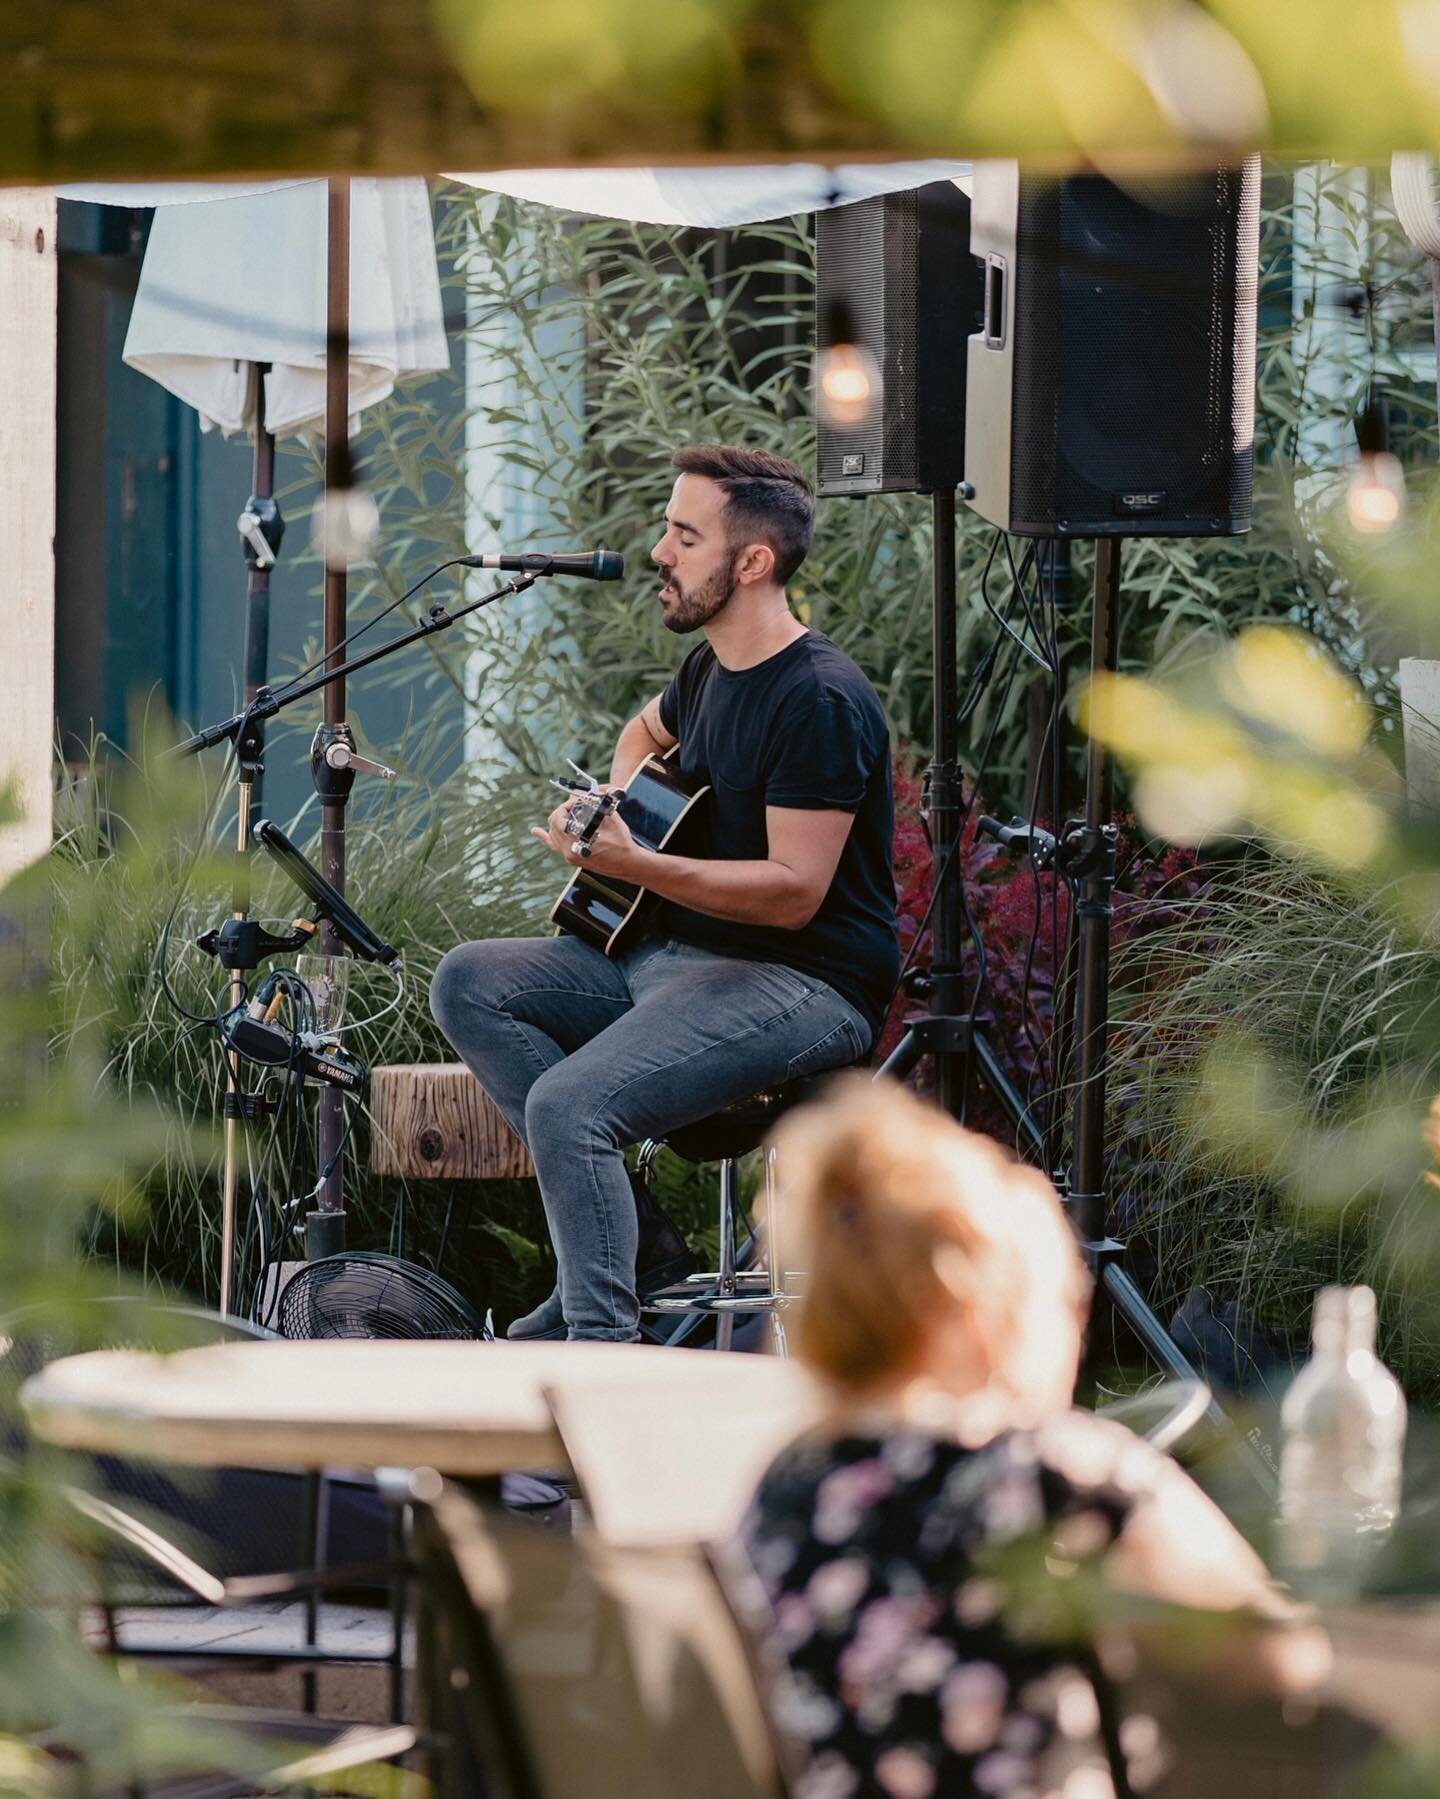 Our patio will be open soon and we are excited to kick back and be serenaded by our lineup of talented musicians playing all summer long. This year we have return of our favourites @michaelsaracinomusic, @tinroofduo and @jpshalala as well as some fam